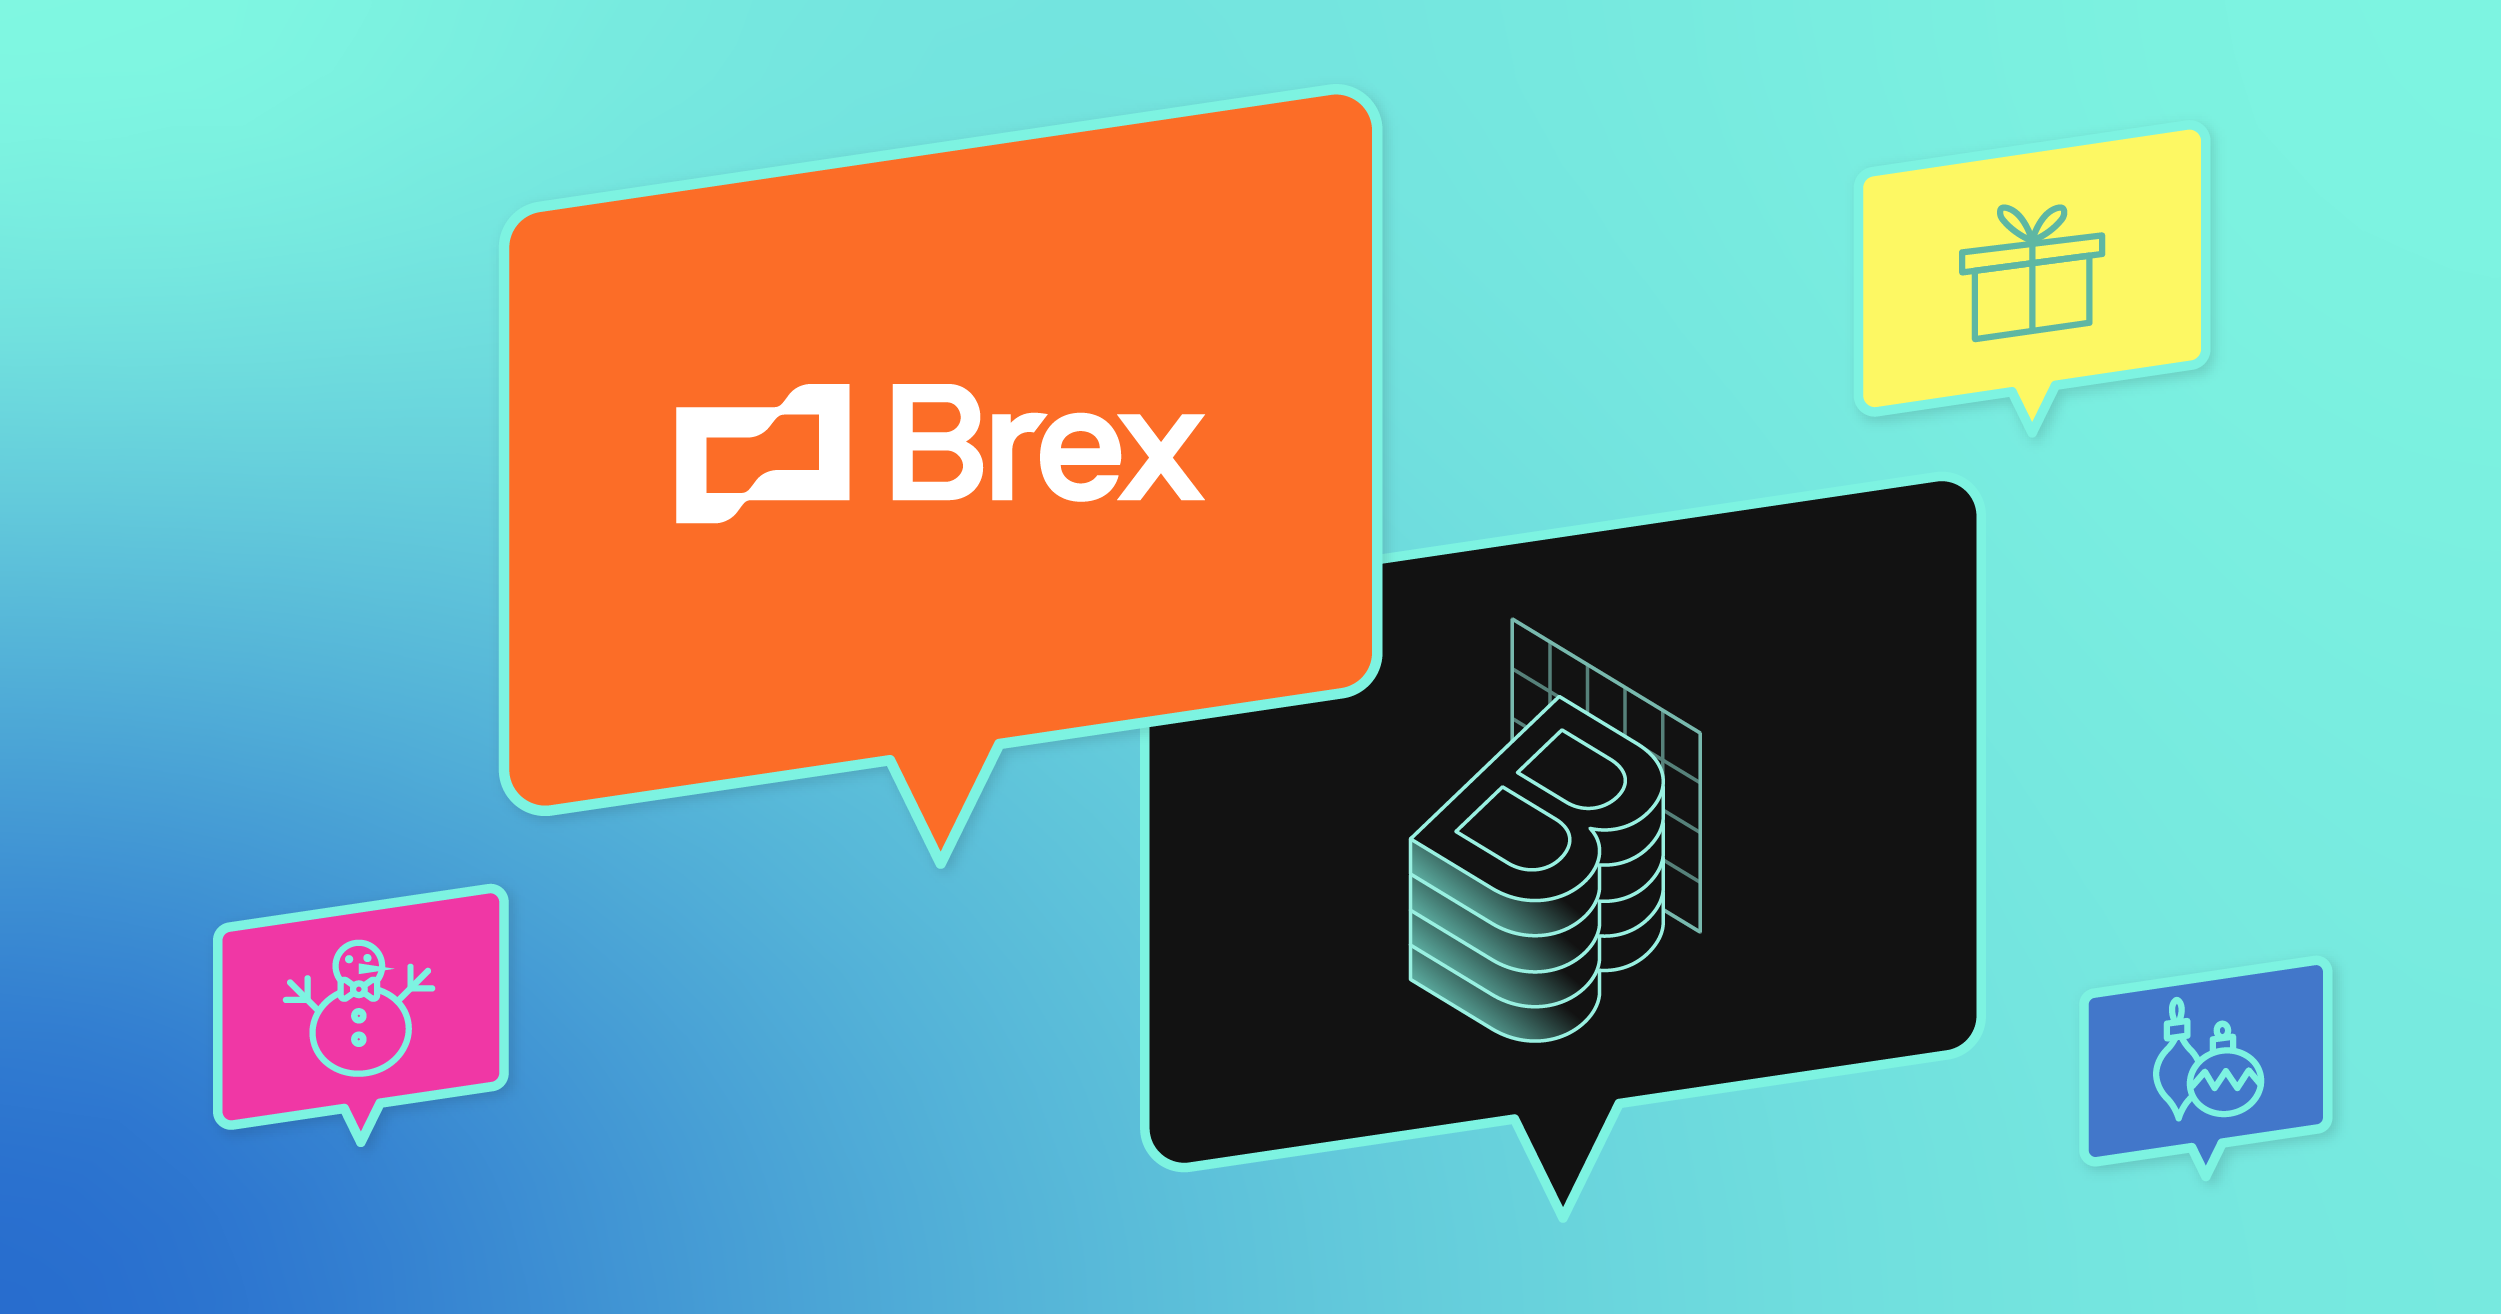 Brex shares their Backstage adoption journey, Backstage Upgrade Helper demo, and holiday treats